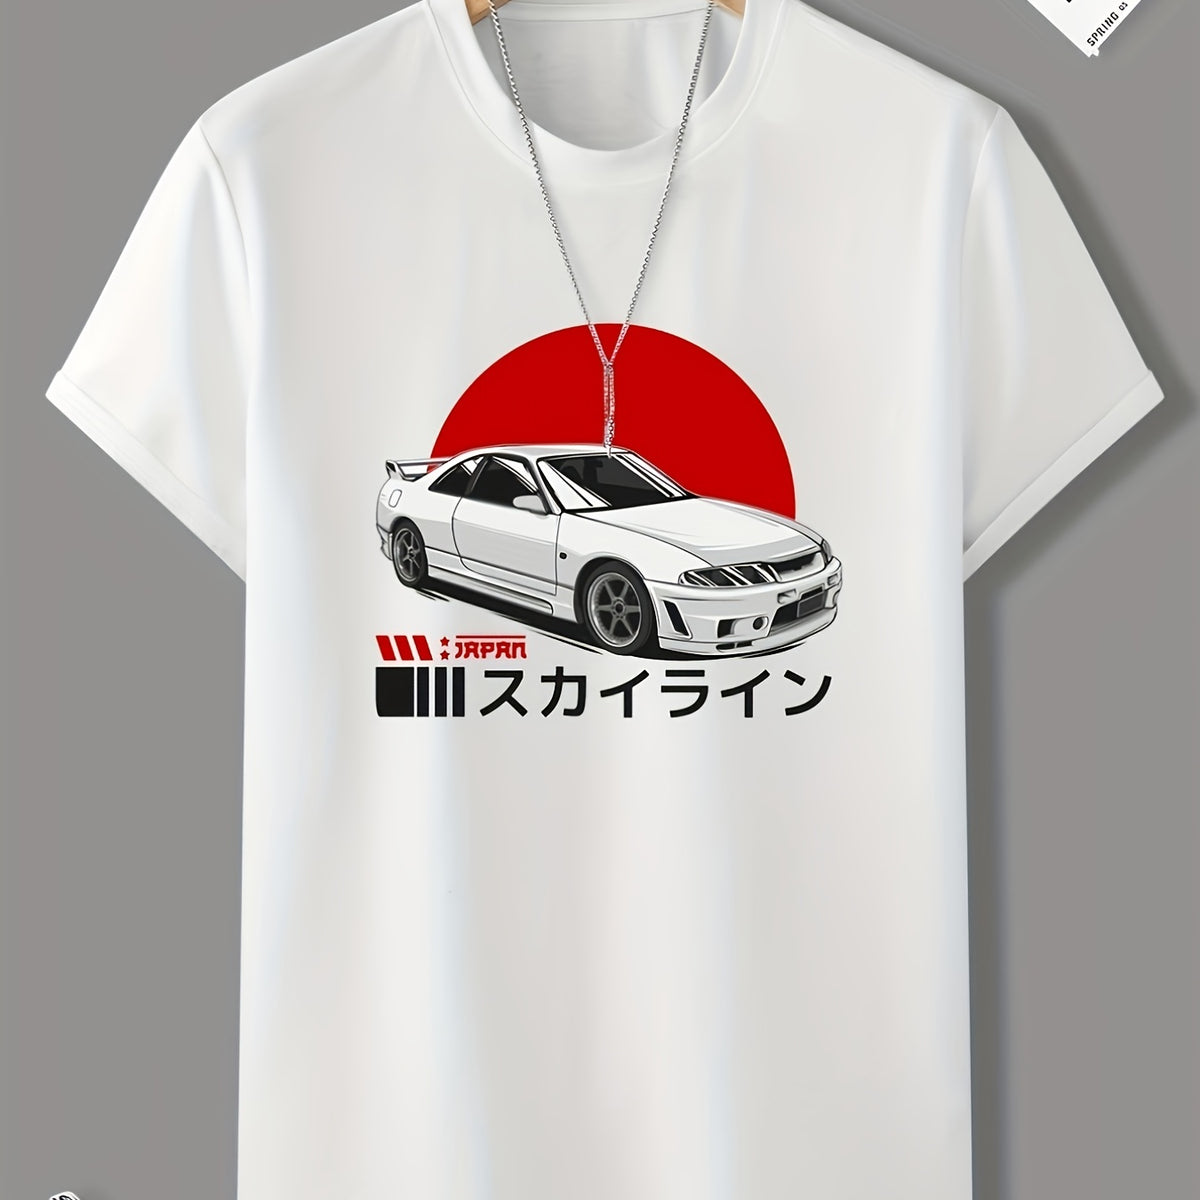 Japanese Characters & Car Print T Shirt, Tees For Men, Casual Short Sleeve Tshirt For Summer Spring Fall, Tops As Gifts